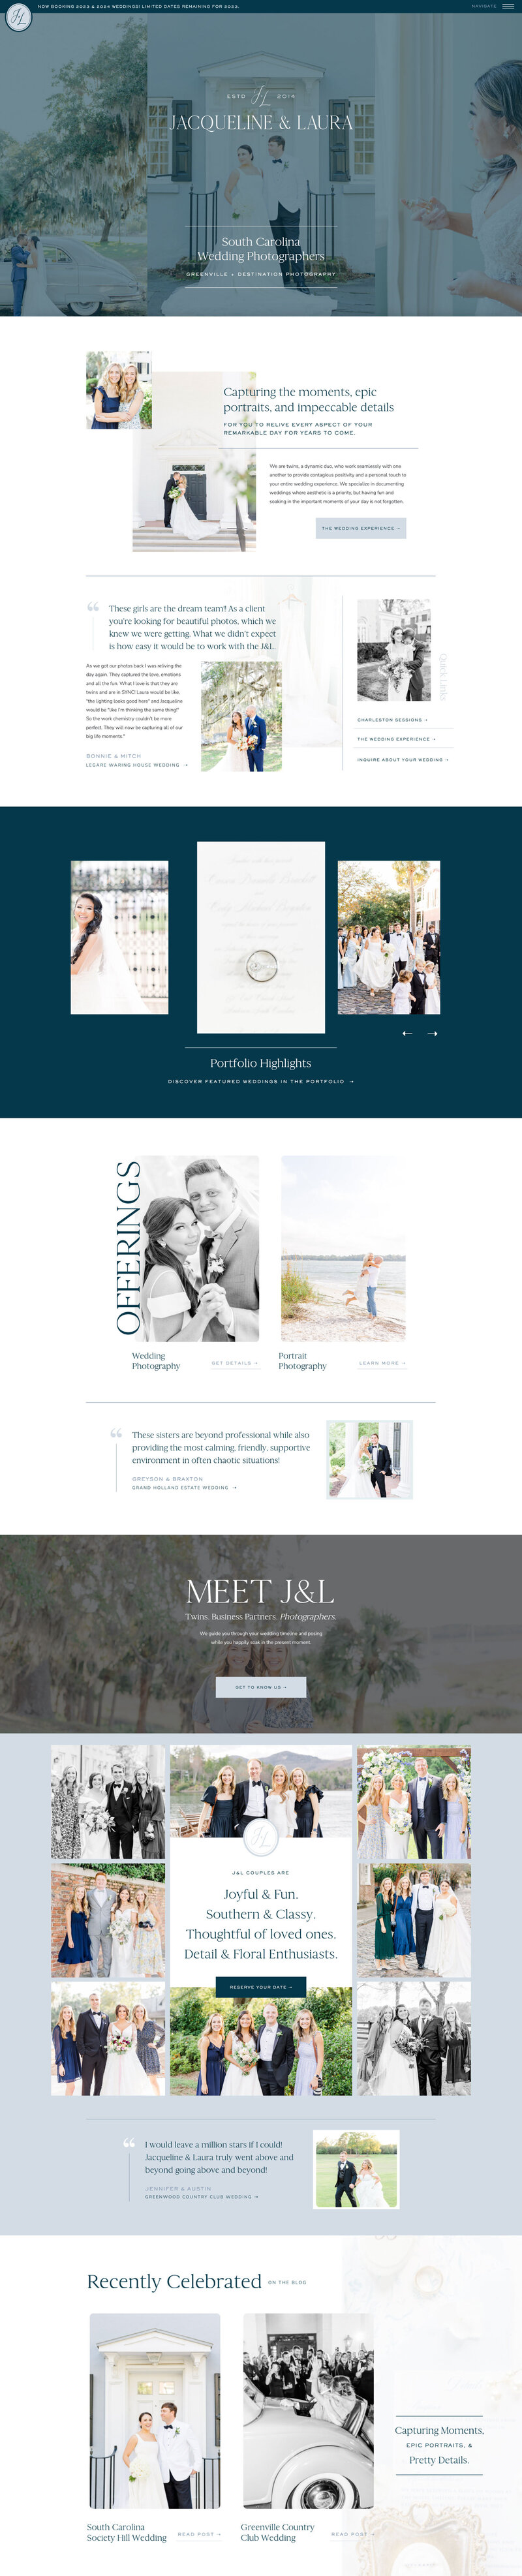 mockup showing a blue and white wedding photography website